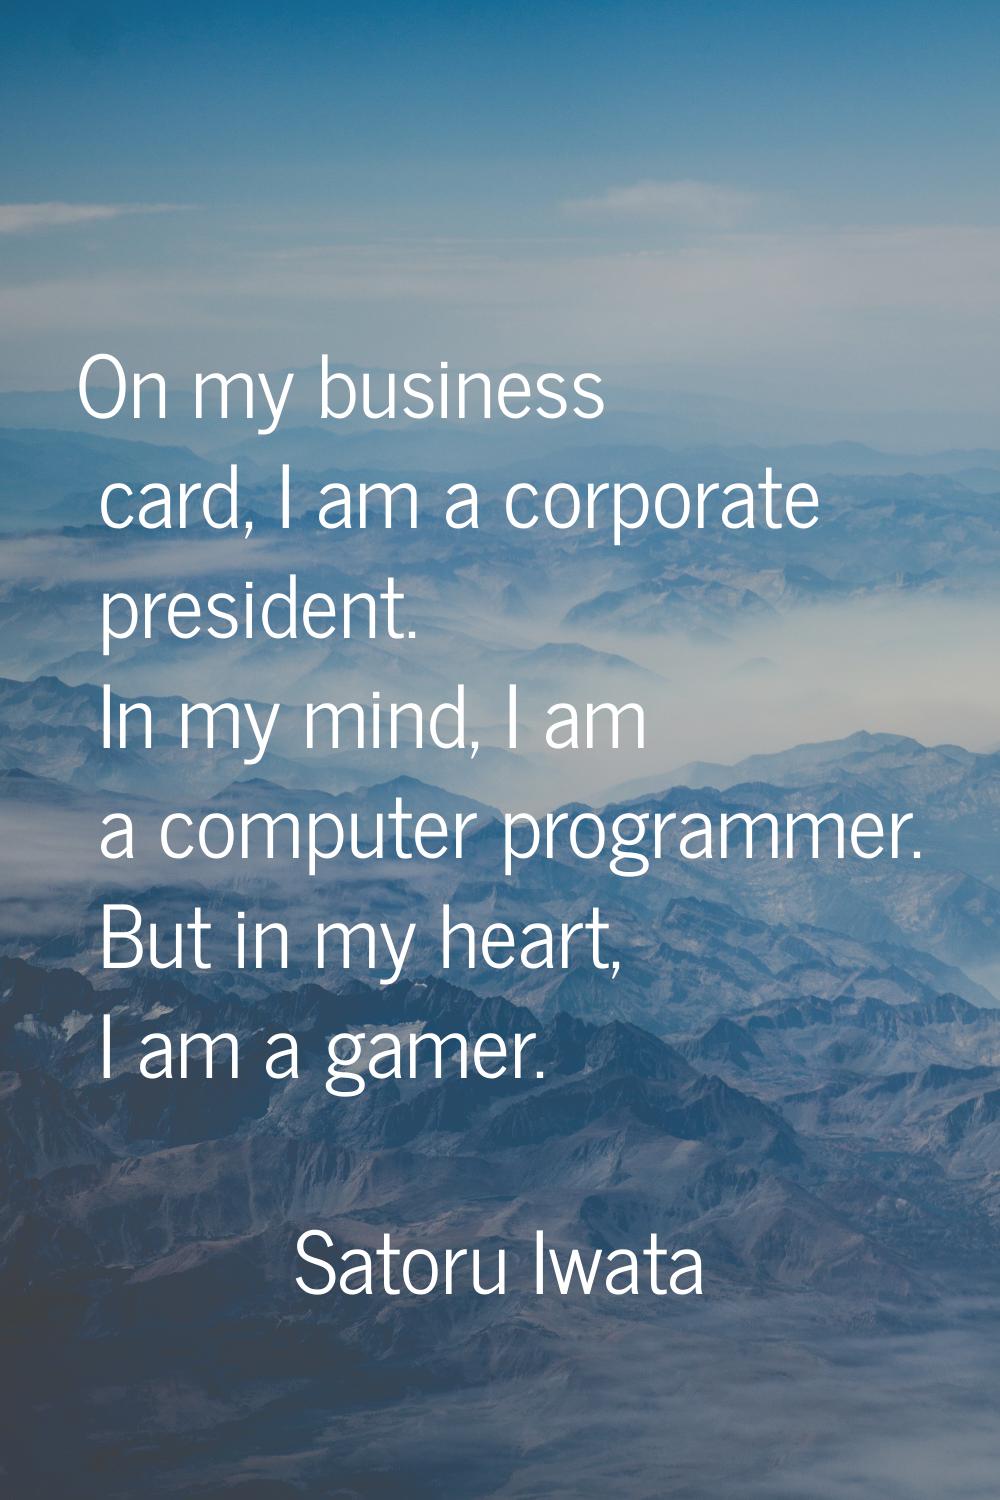 On my business card, I am a corporate president. In my mind, I am a computer programmer. But in my 